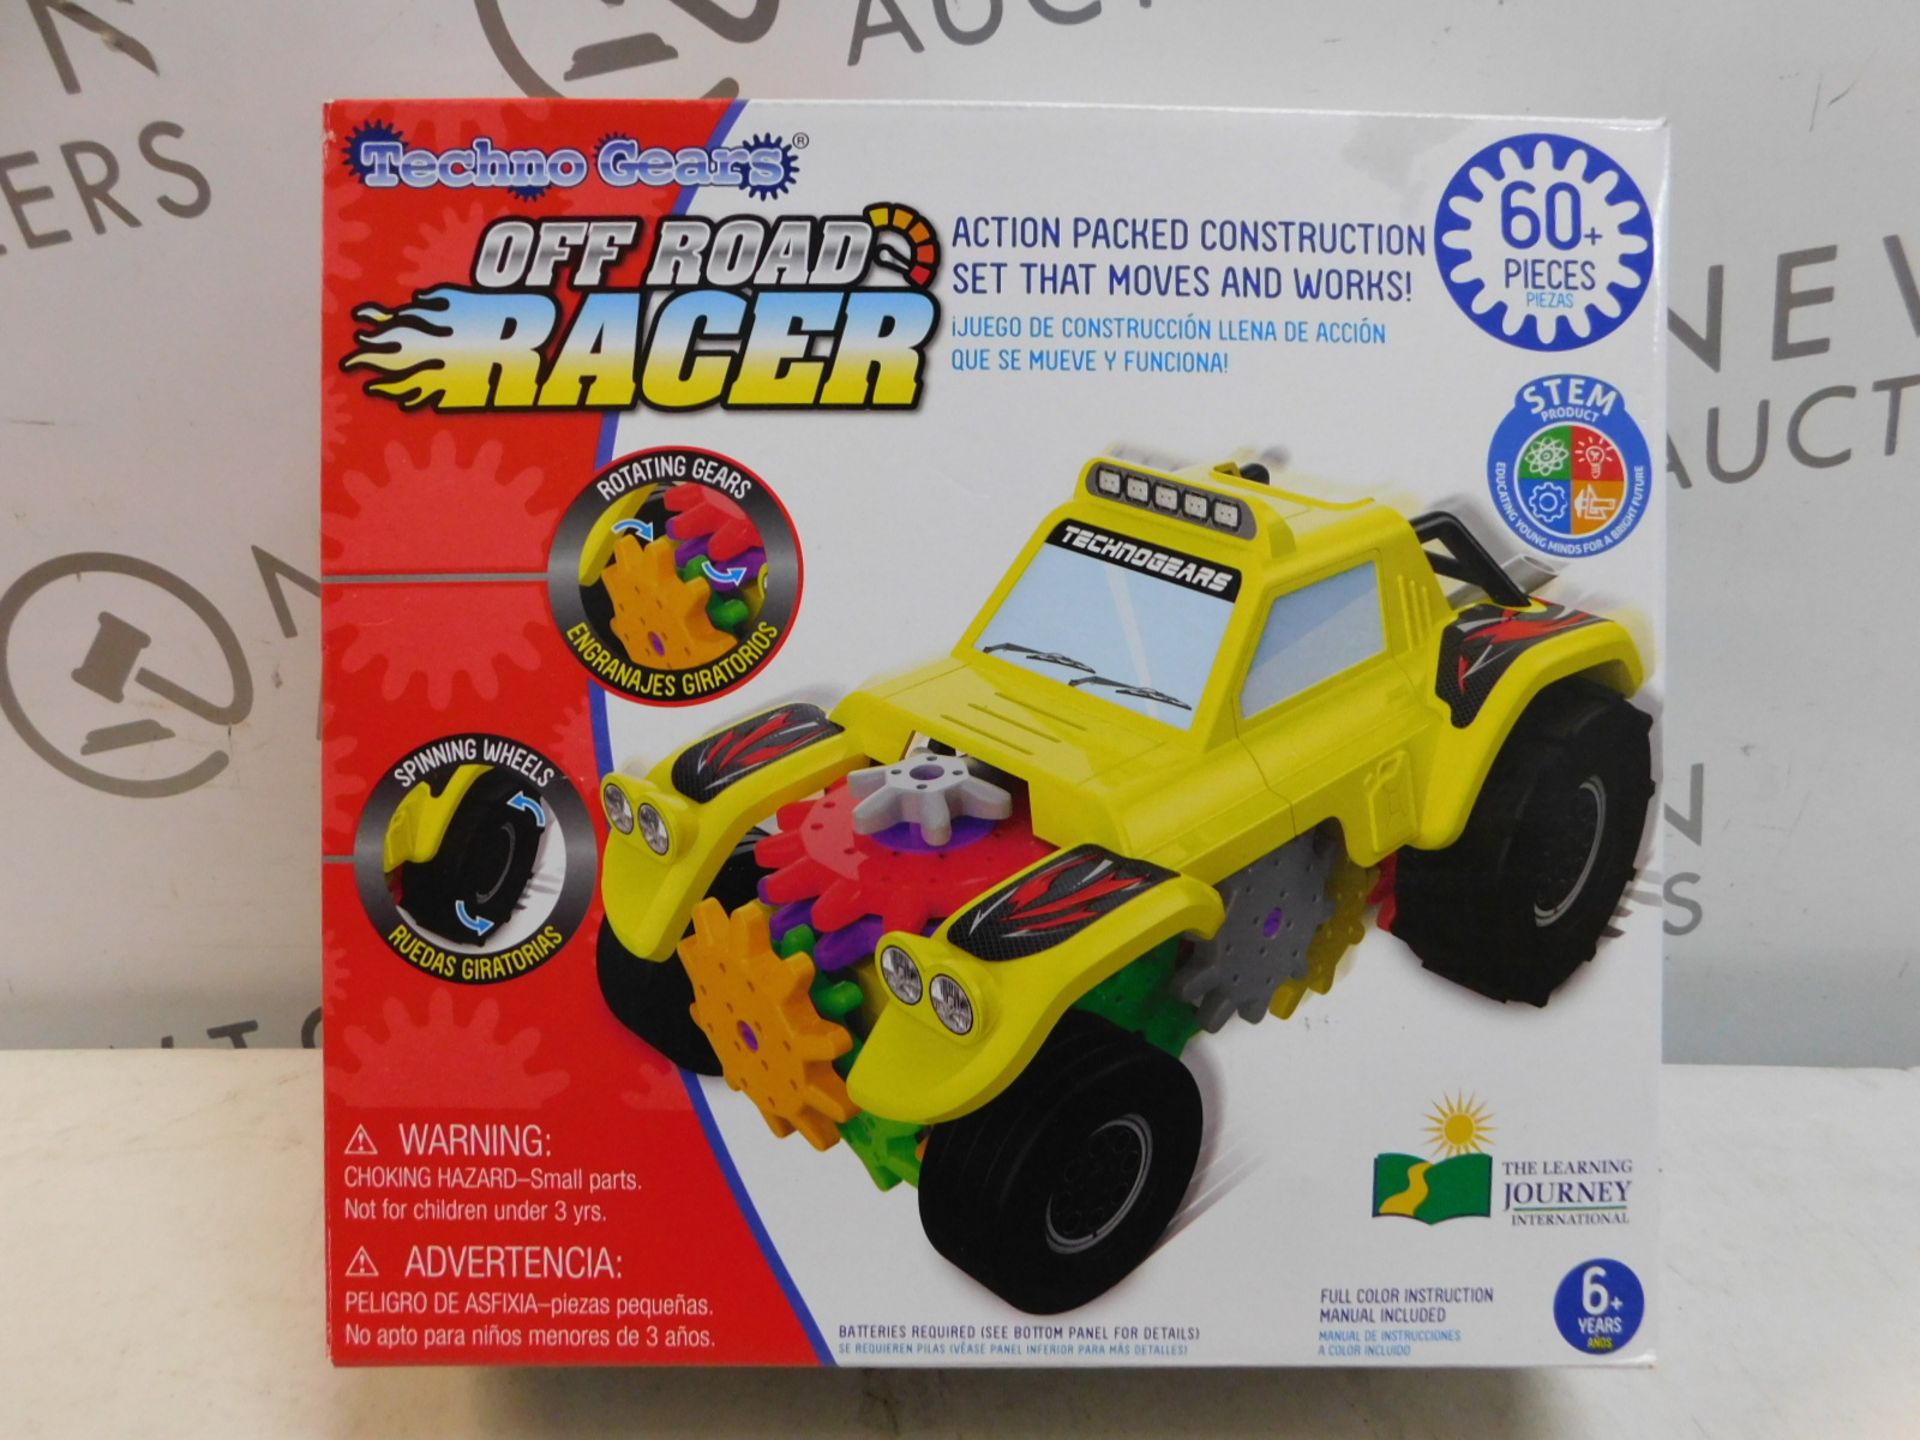 1 BOXED TECHNO GEARS OFF ROAD RACER RRP Â£39